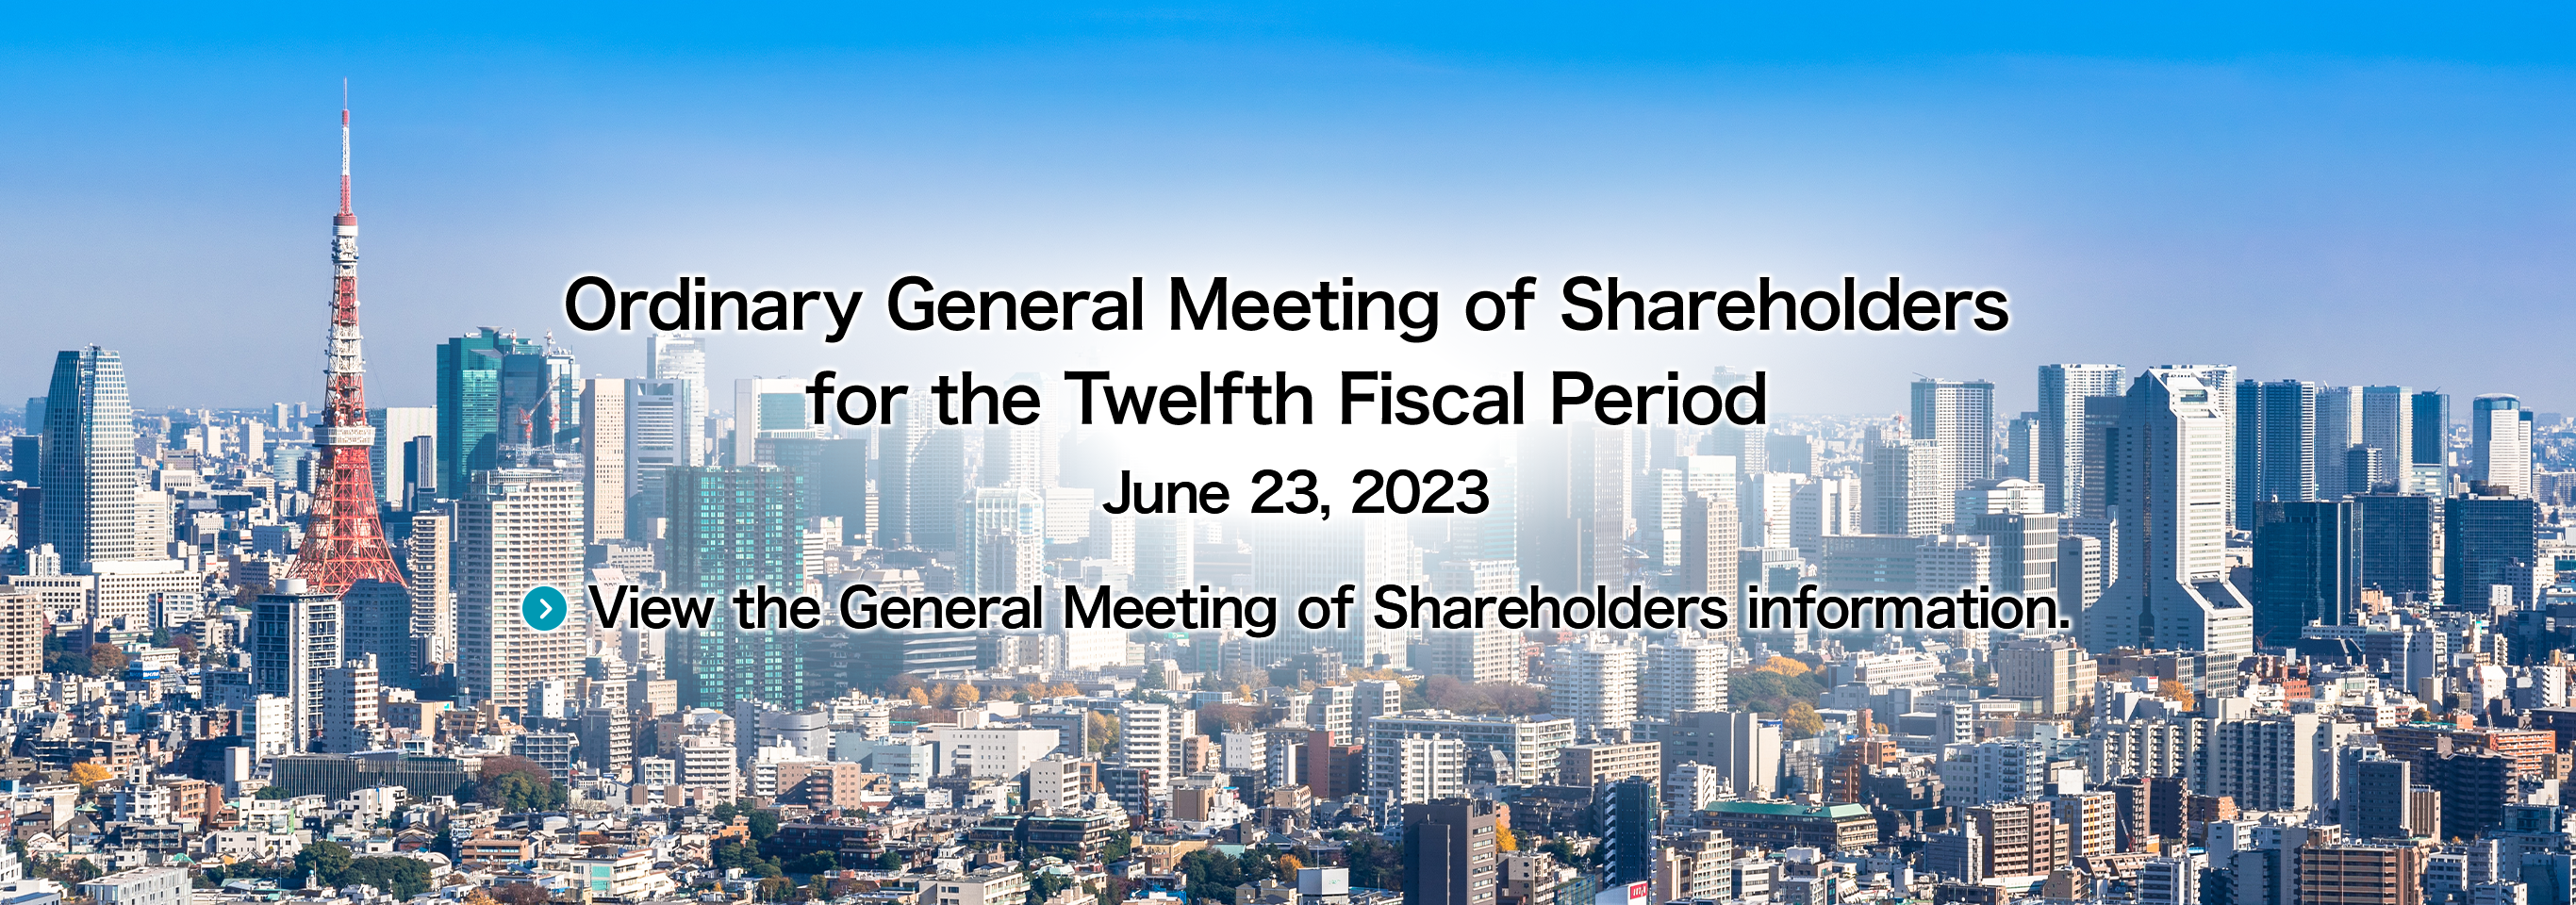 Ordinary General Meeting of Shareholders for the Twelfth Fiscal Period June 23, 2023 View the General Meeting of Shareholders information.